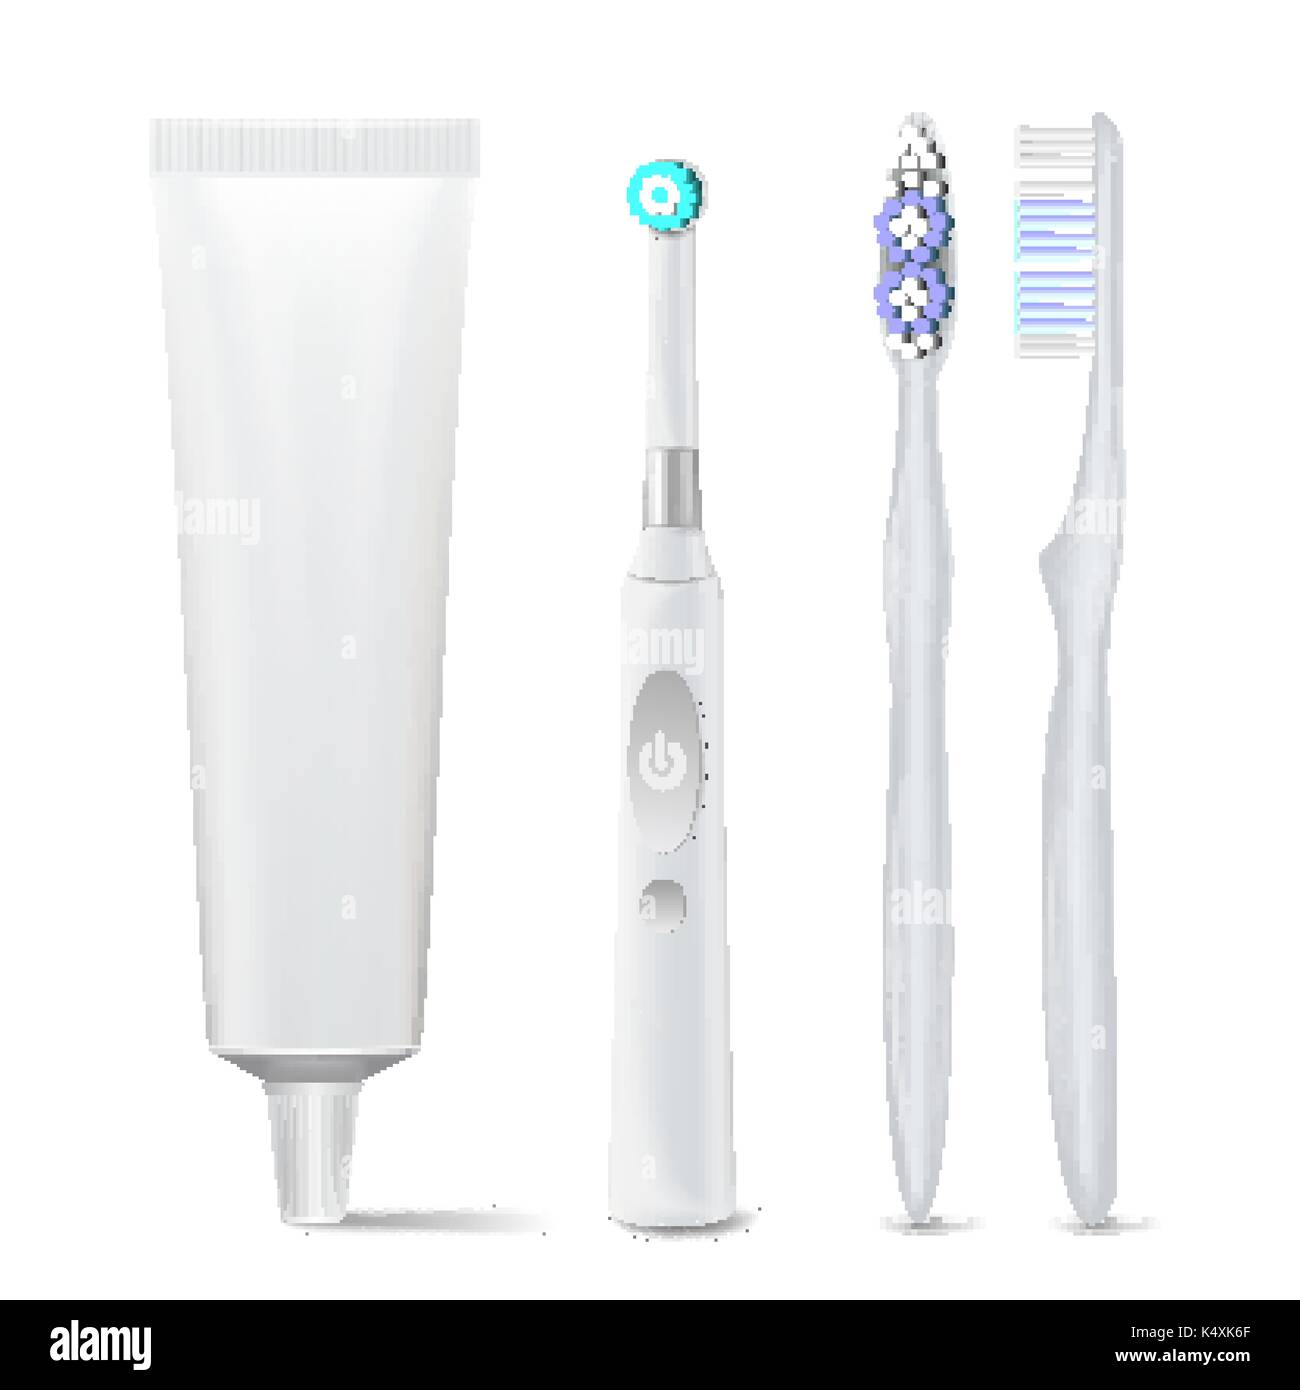 Download Electric And Plastic Toothbrush Toothpaste Tube Vector Mock Up For Branding Design Medicine Hygiene Concept Isolated Illustration Stock Vector Image Art Alamy